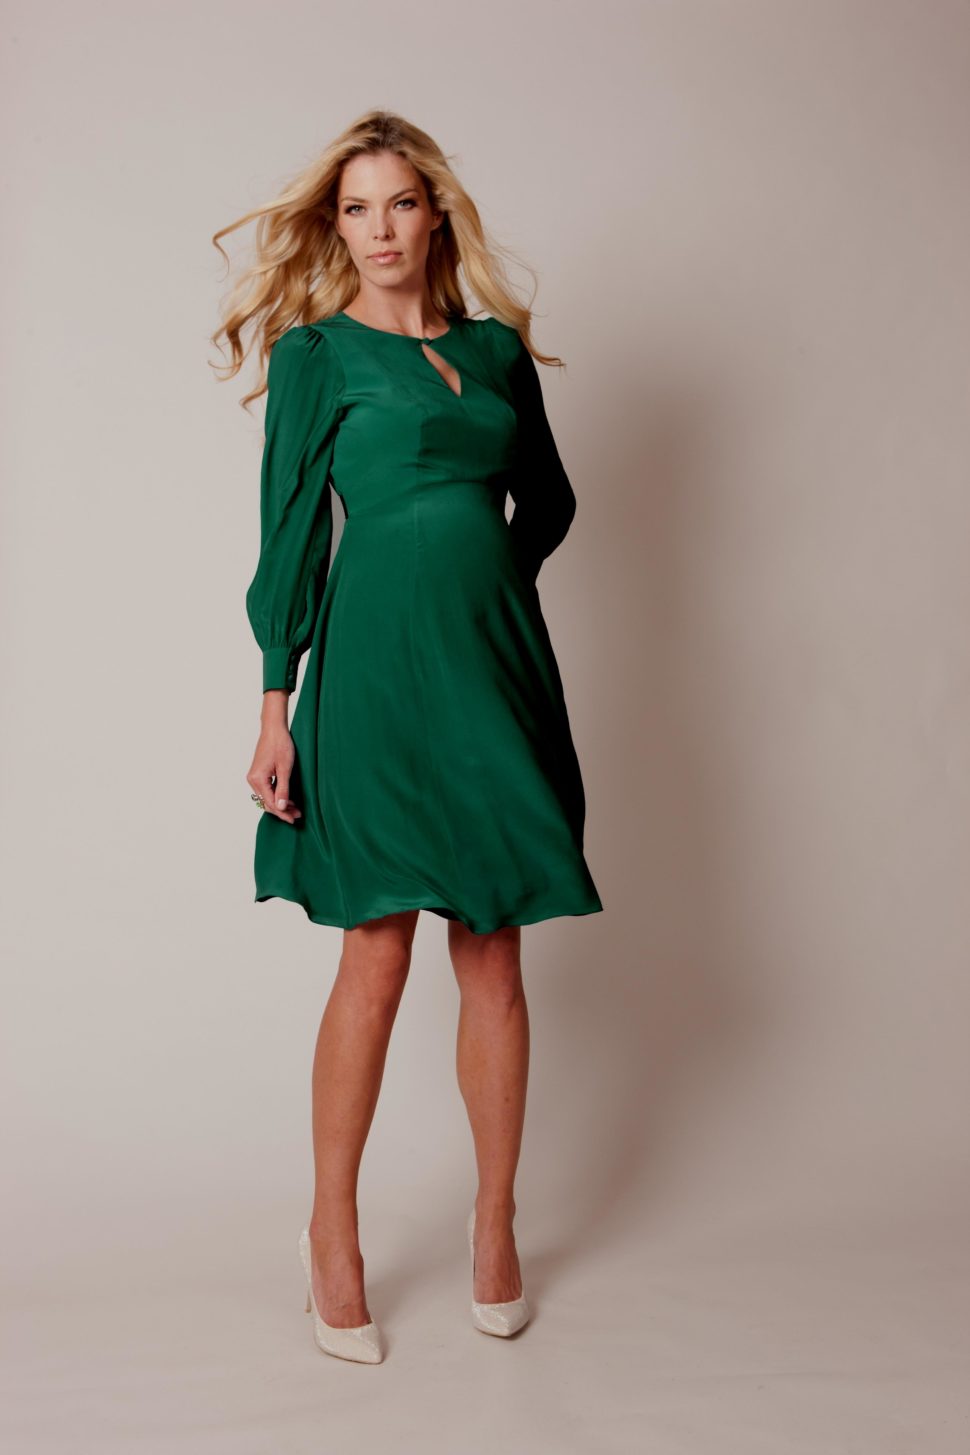 Medium Size of Baby Shower:maternity Boutique Cute Maternity Dresses For Baby Shower Affordable Maternity Dresses For Baby Shower What To Wear To My Baby Shower Baby Shower Attire For Mom Maternity Blouses For Baby Shower Maternity Dresses For Baby Showers Maternity Dresses For Photoshoot